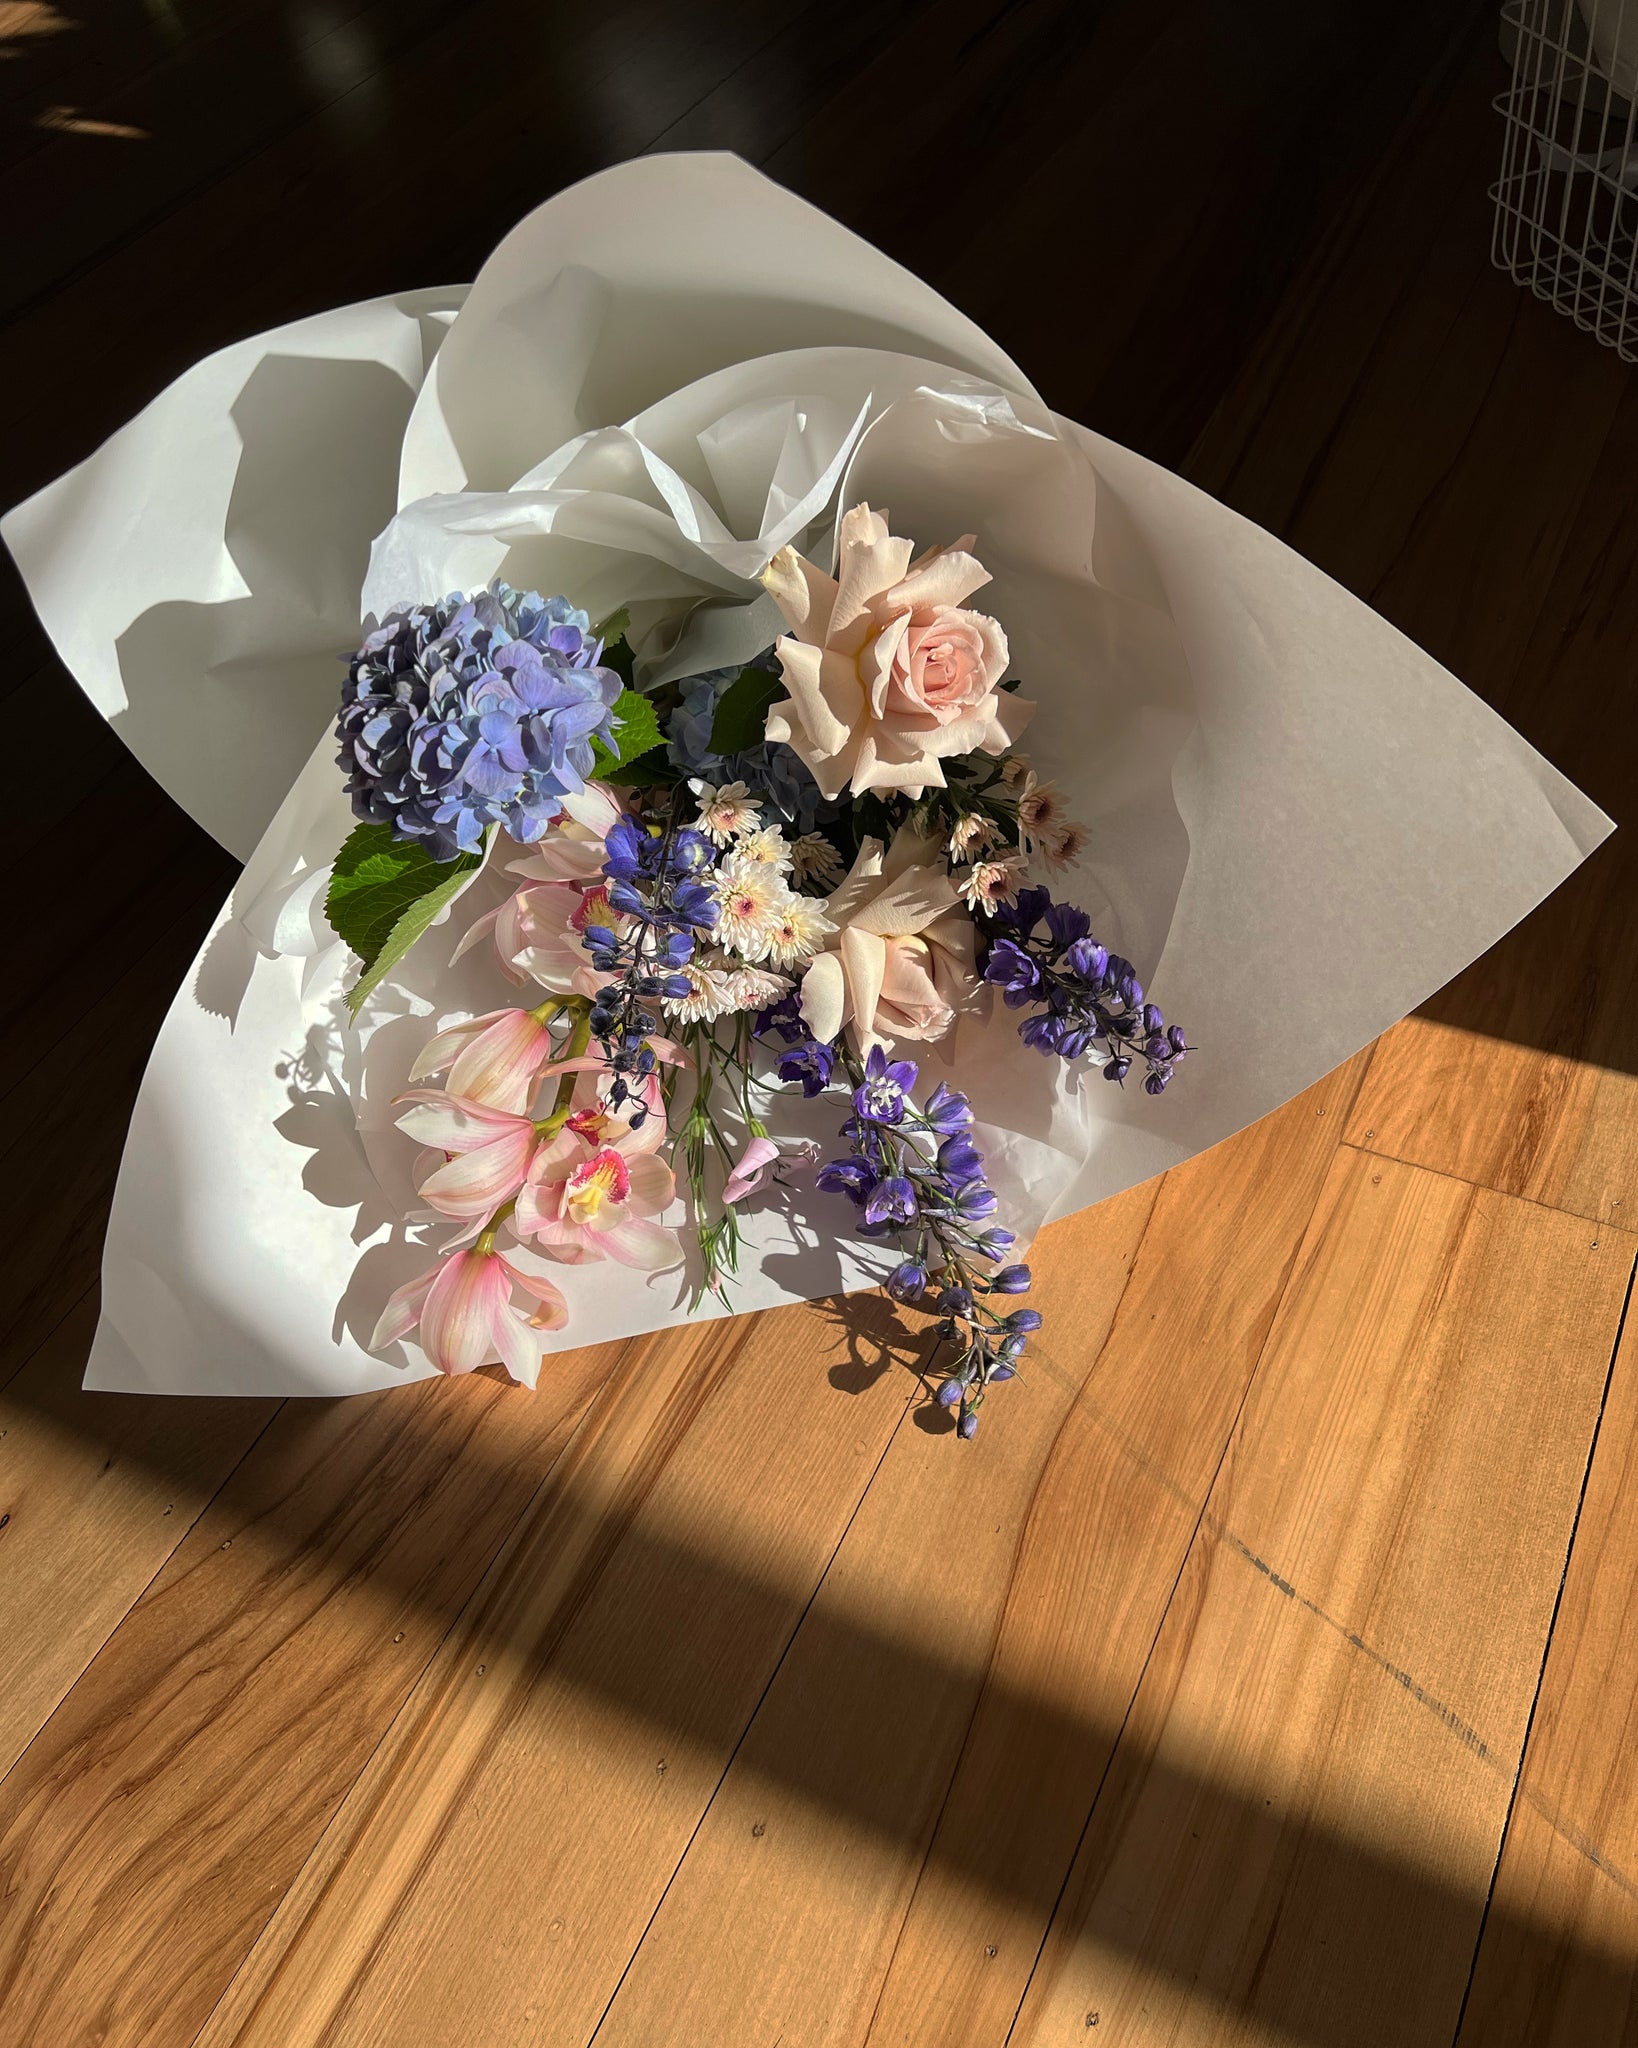 Mini bouquet of dried flowers of florist's choice